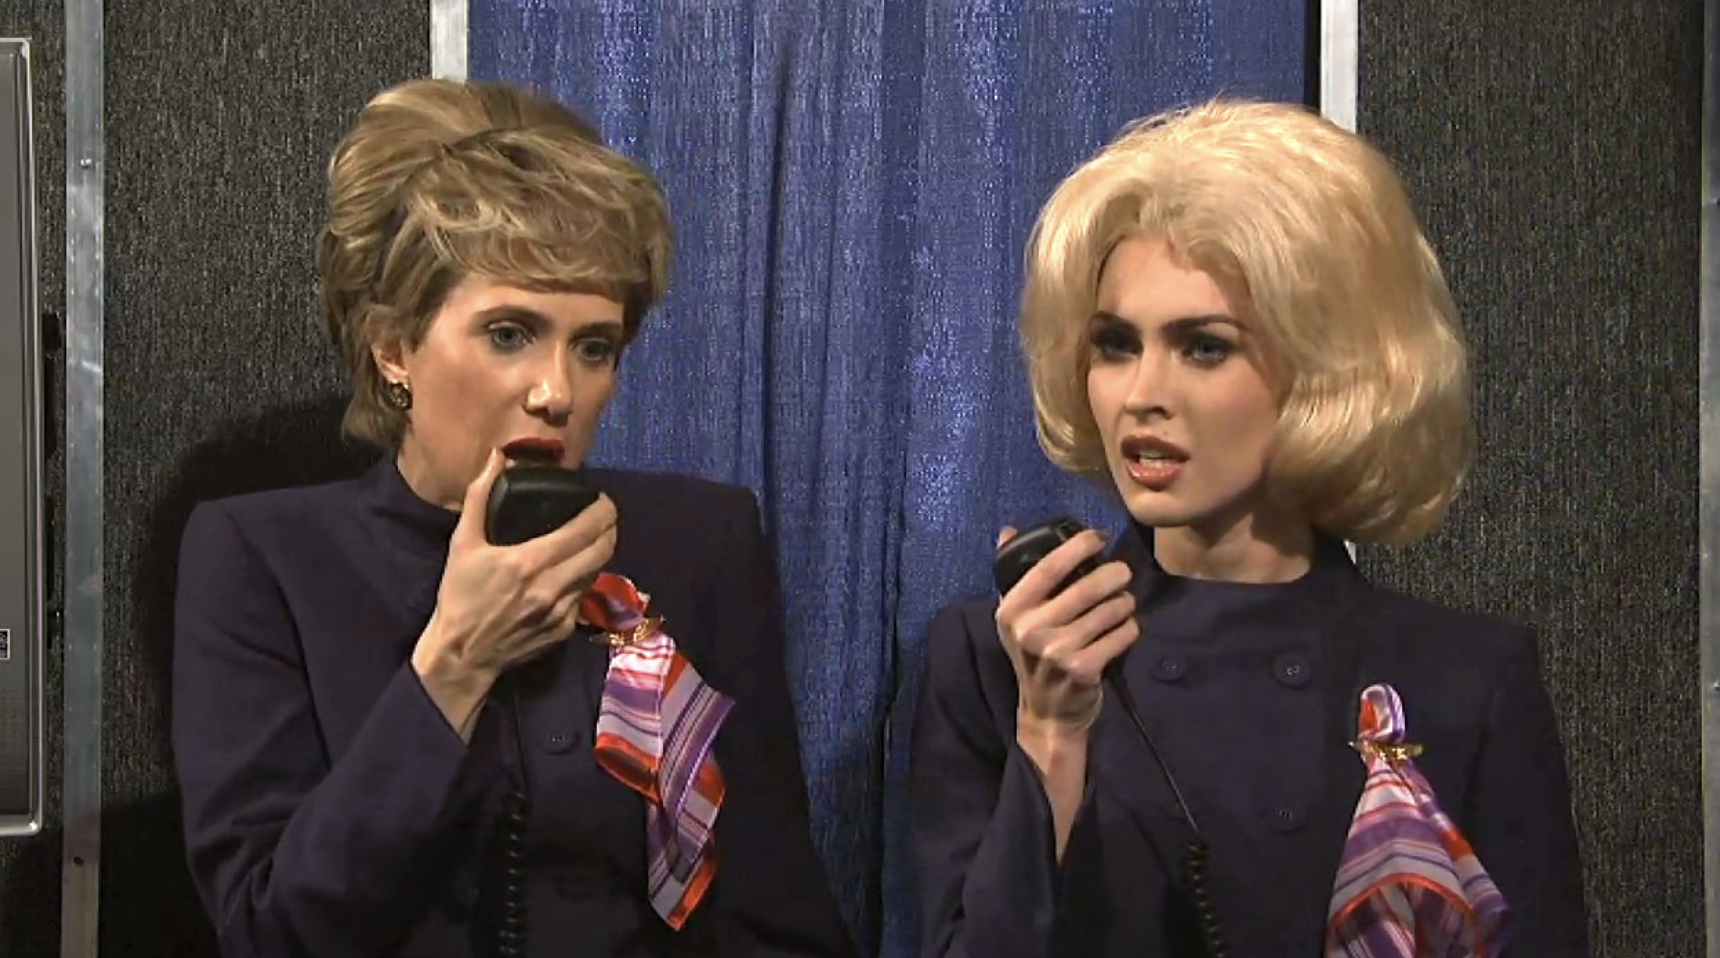 Two people dressed as flight attendants in an &quot;SNL&quot; sketch